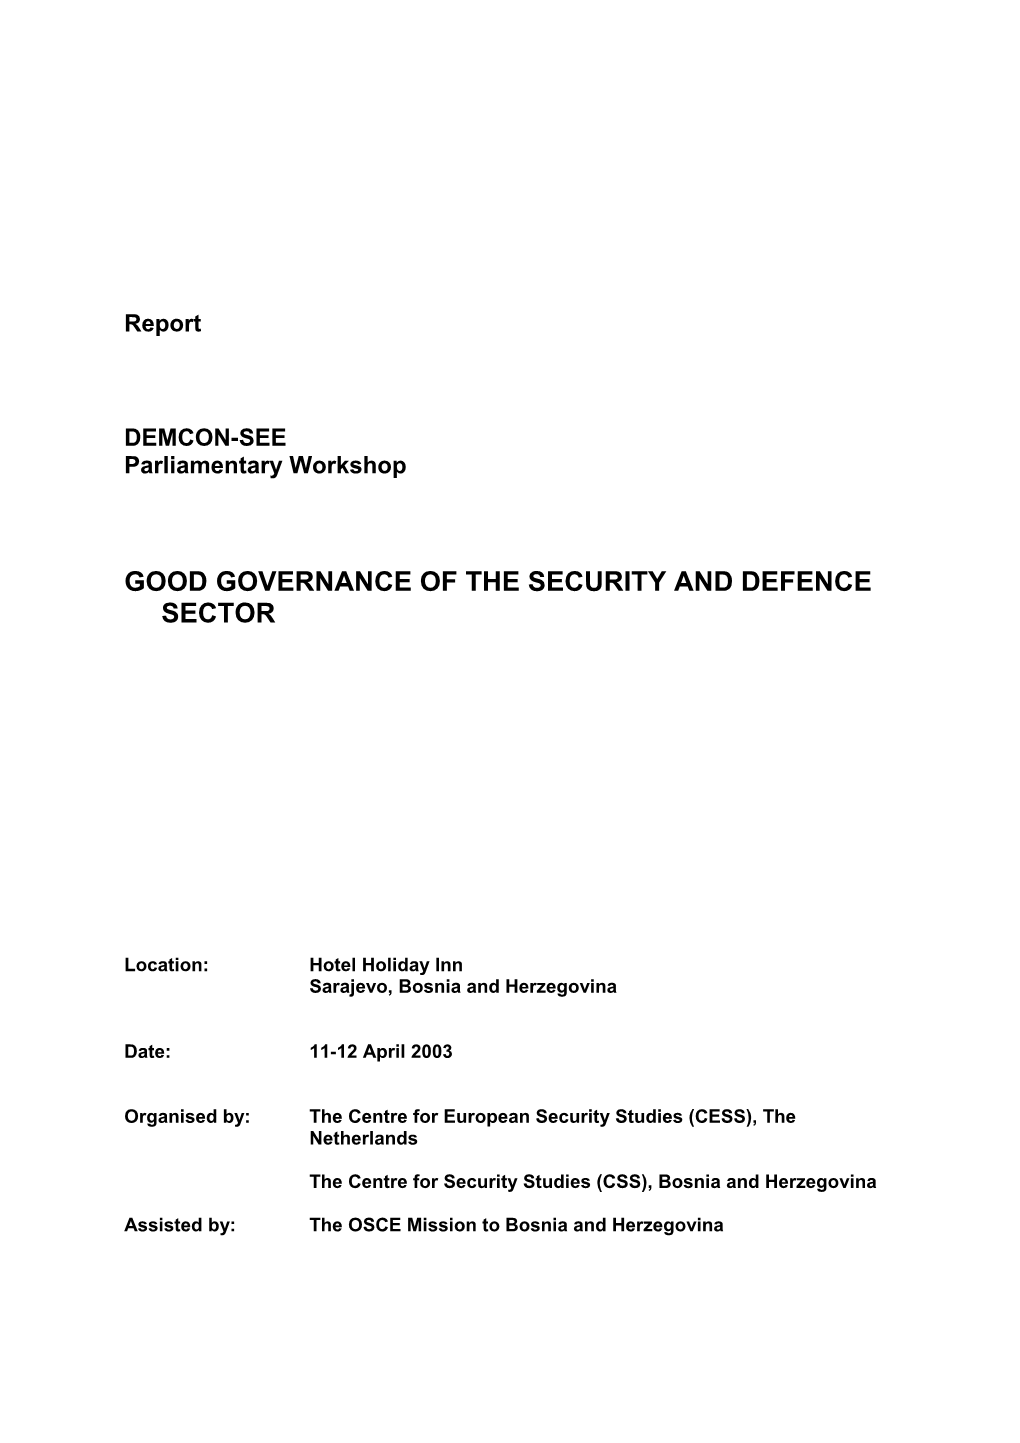 Good Governance of the Security and Defence Sector